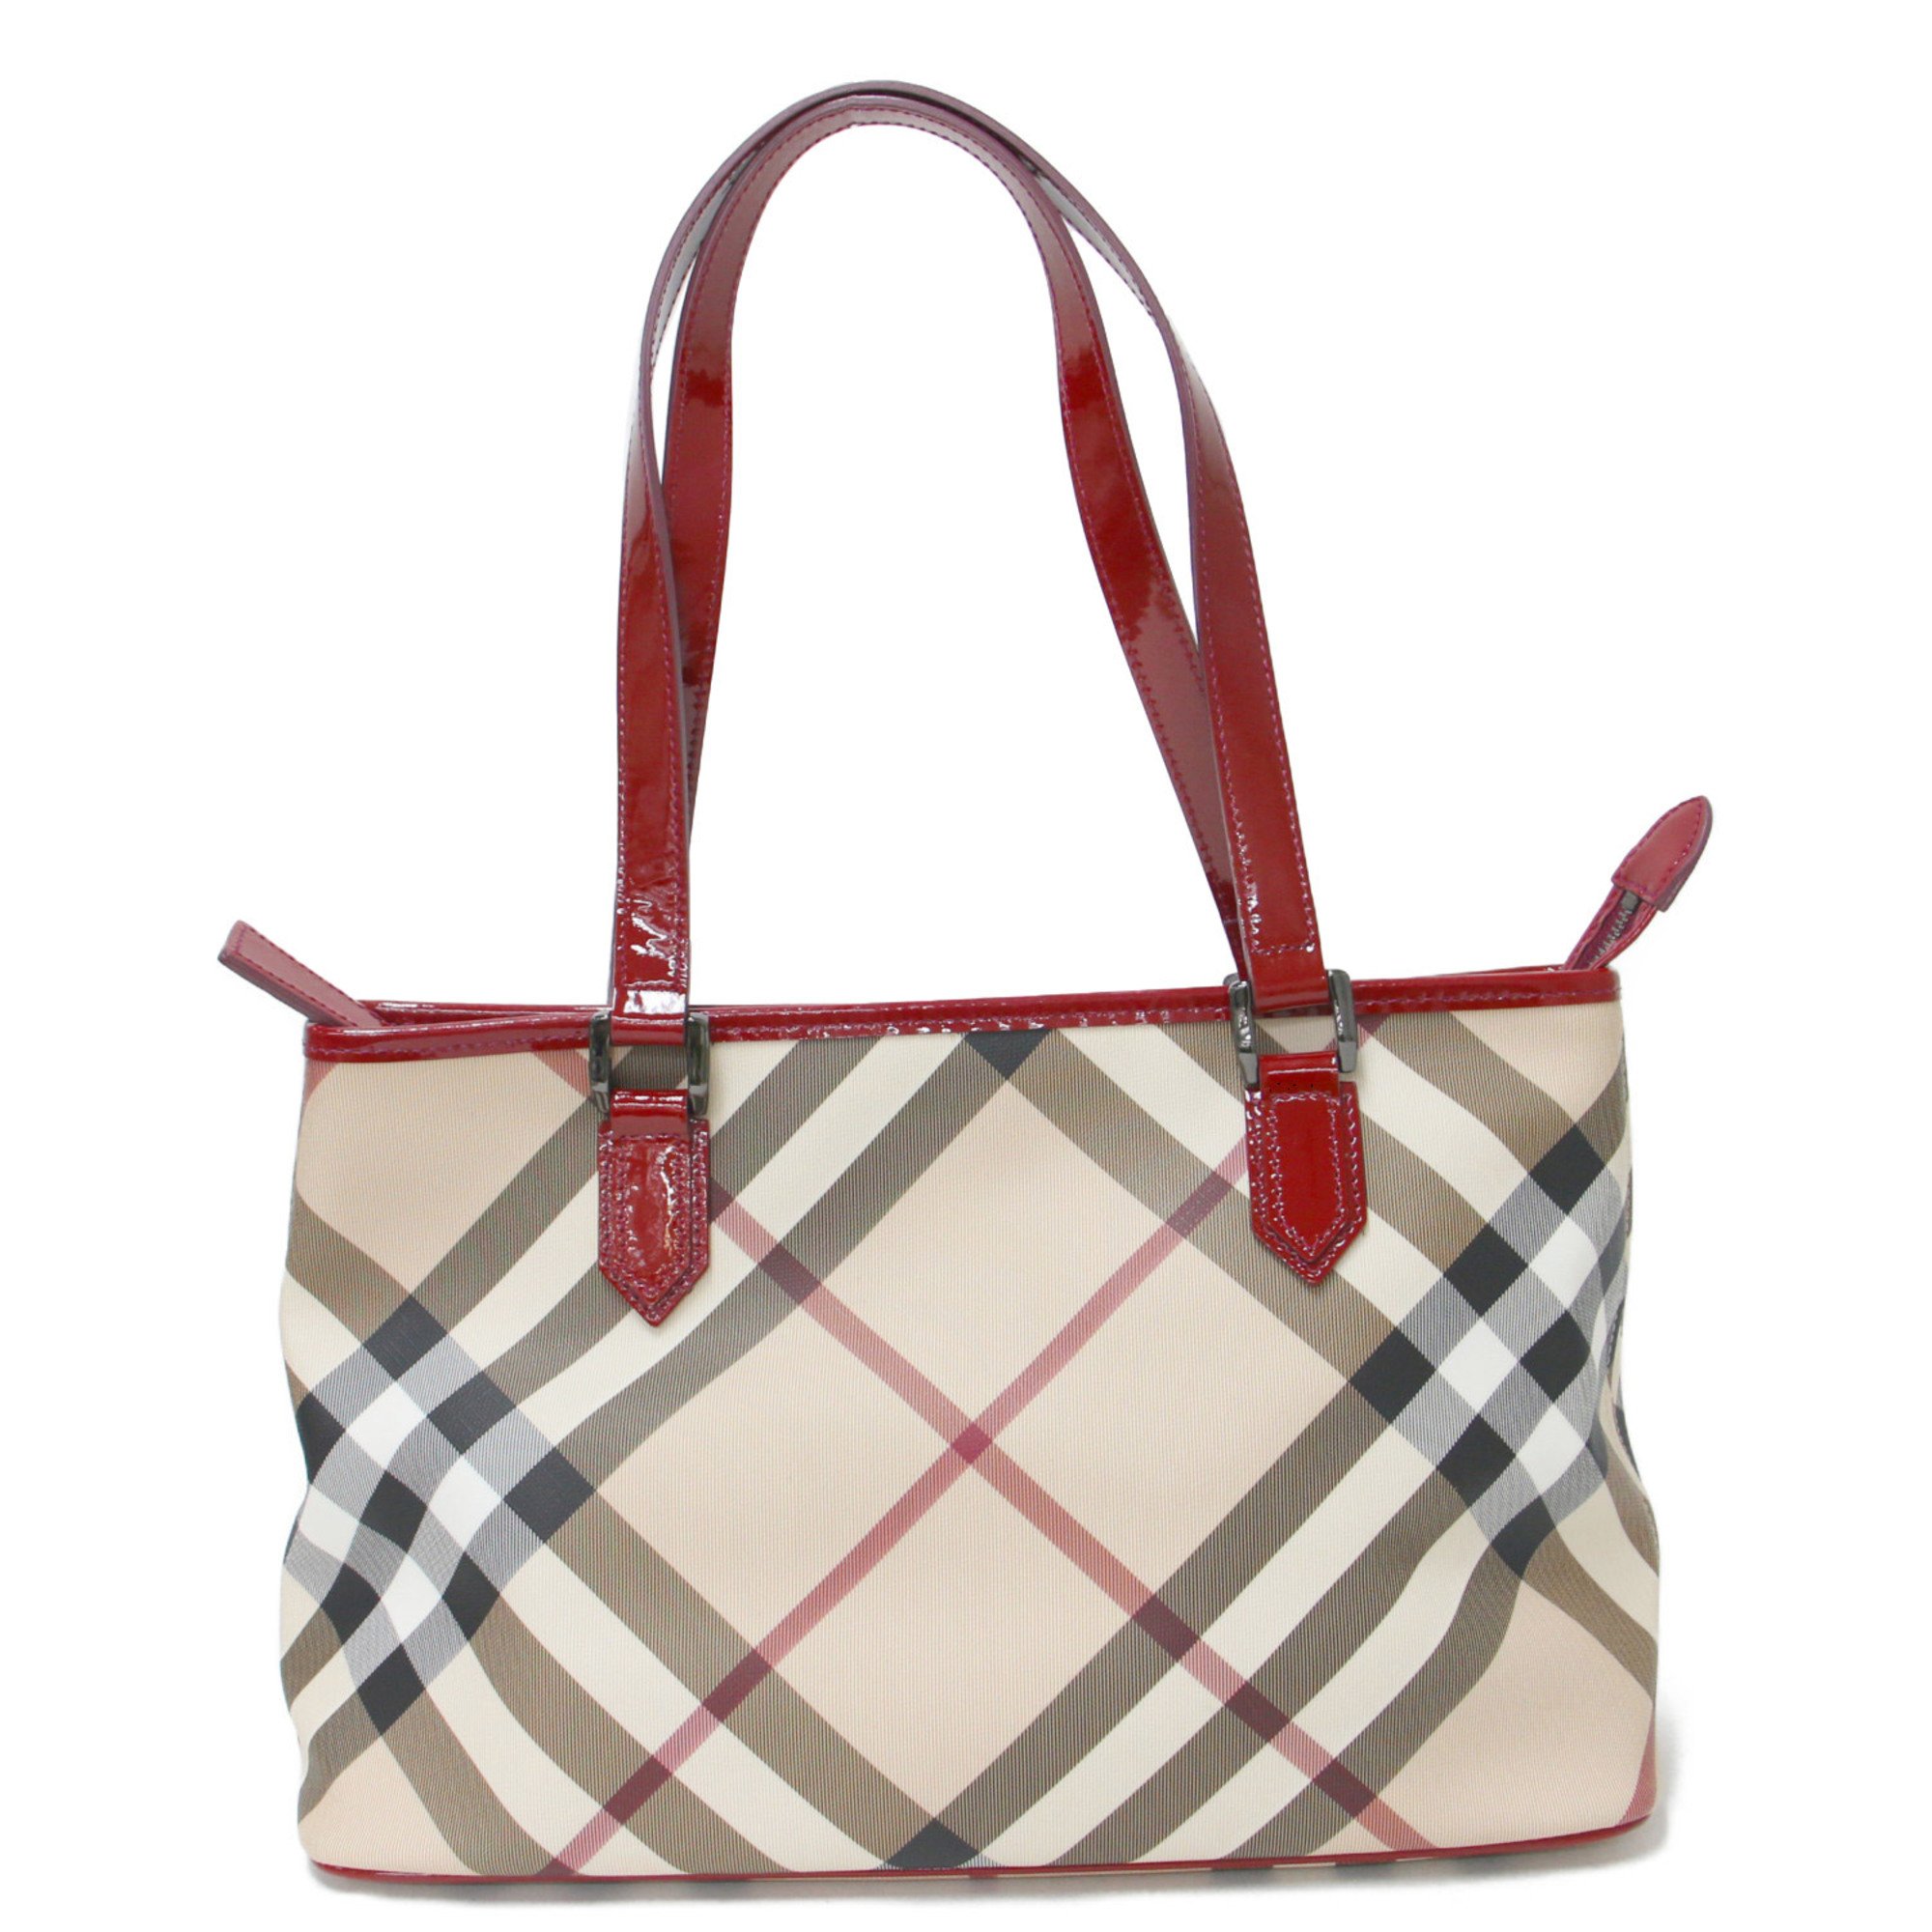 BURBERRY Burberry Bag Tote Beige Red Shoulder Check Enamel Leather